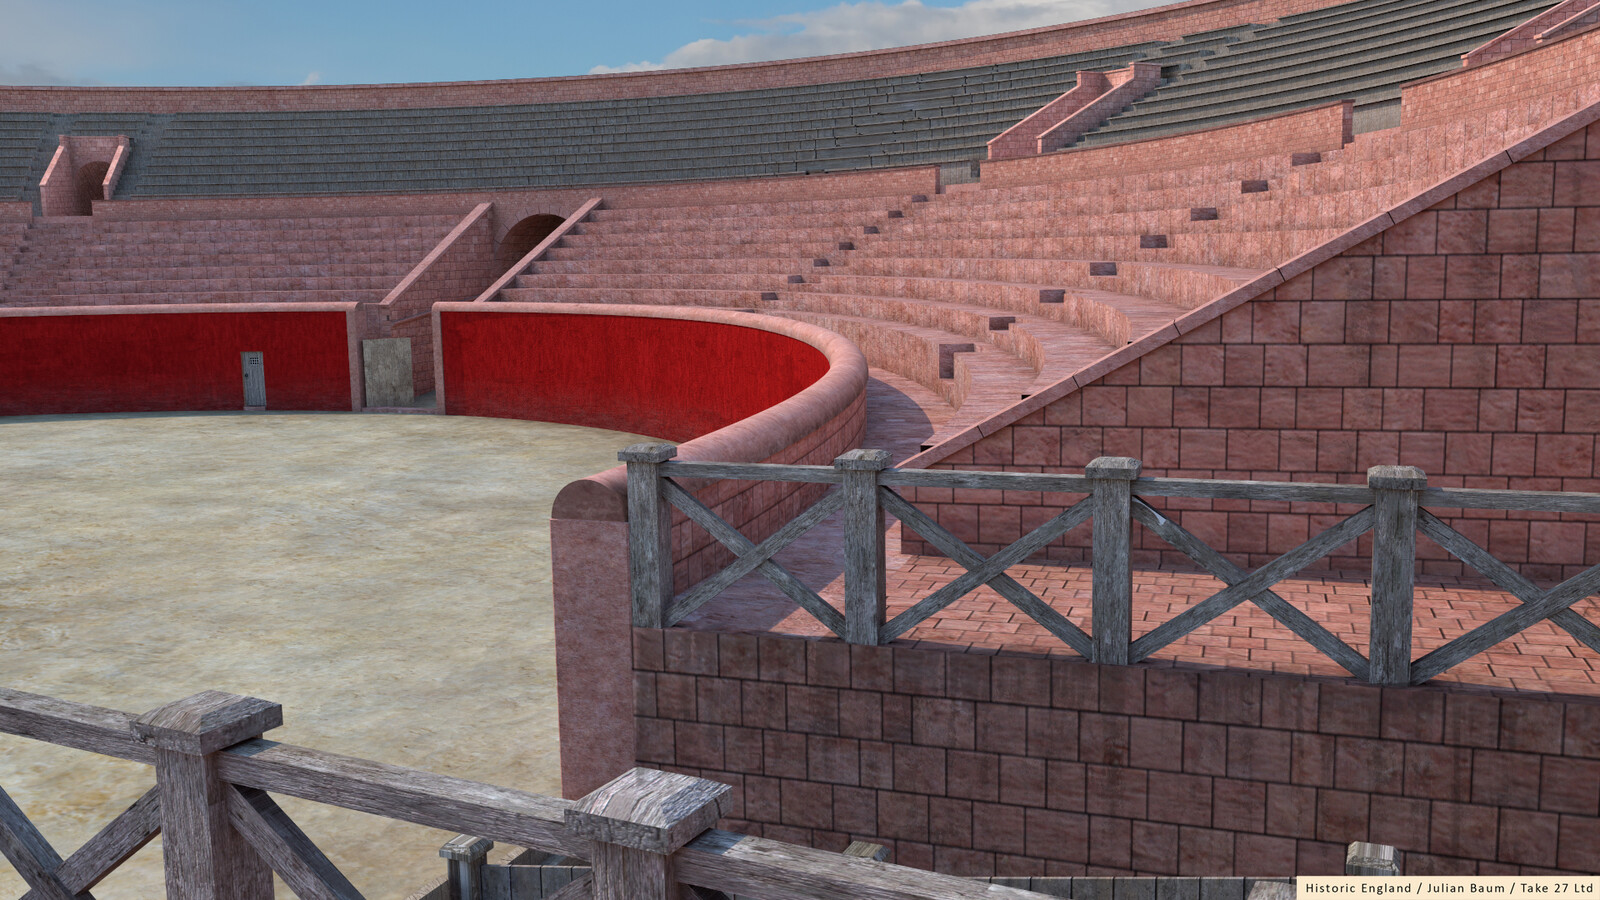 Chester's Roman ampitheatre, showing the lower stone tiers of seating, with the upper tiers being wooden.